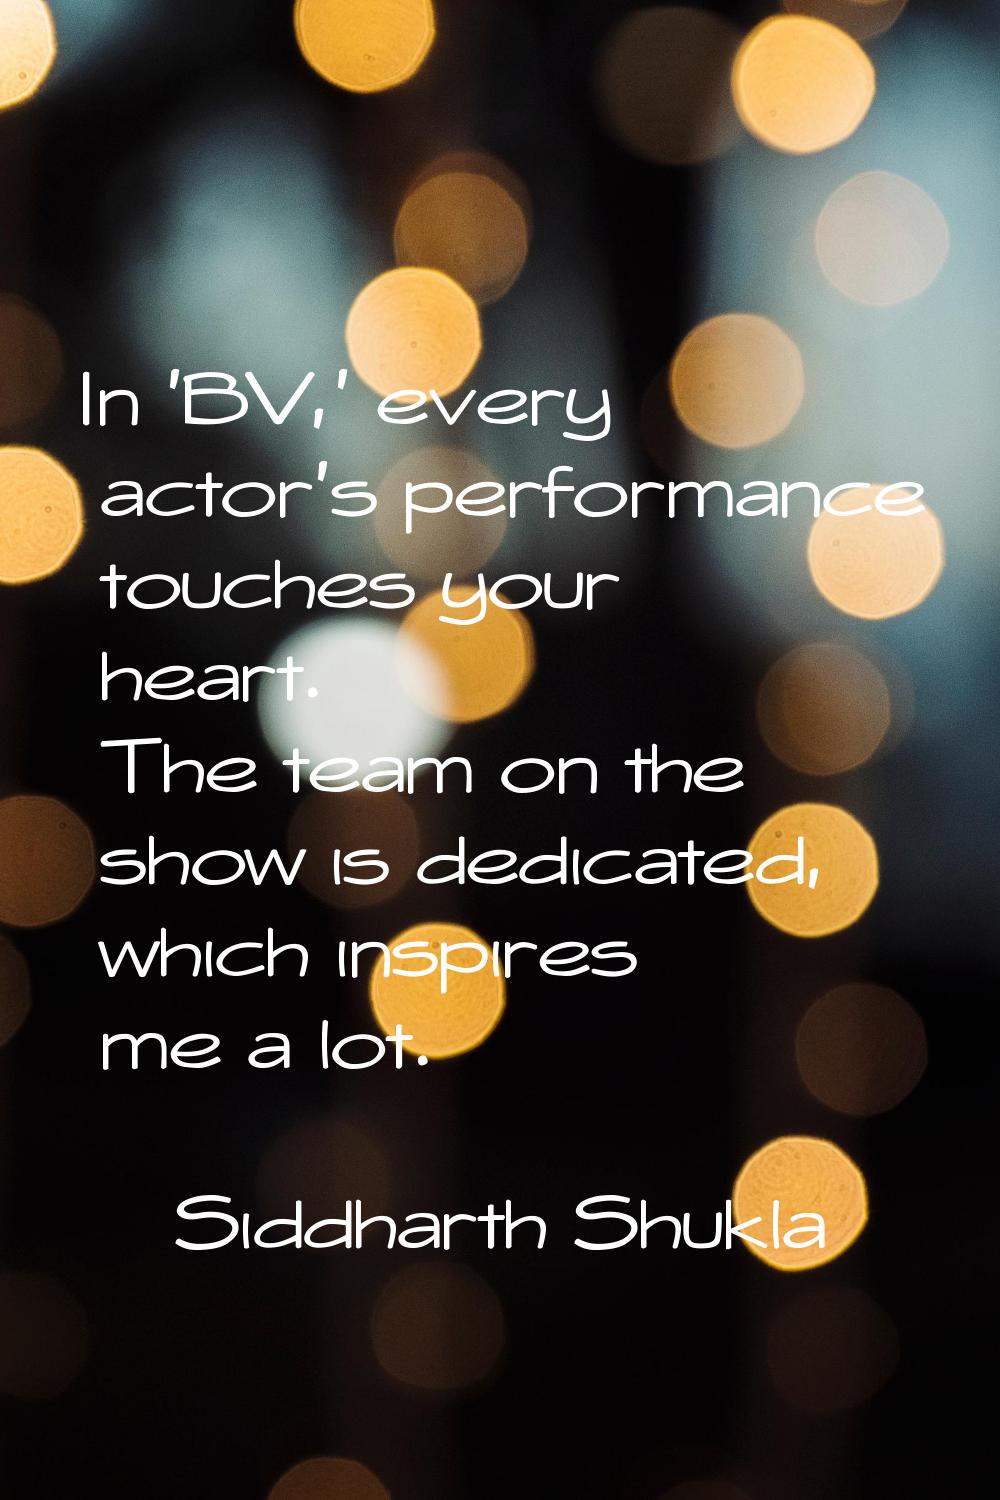 In 'BV,' every actor's performance touches your heart. The team on the show is dedicated, which ins